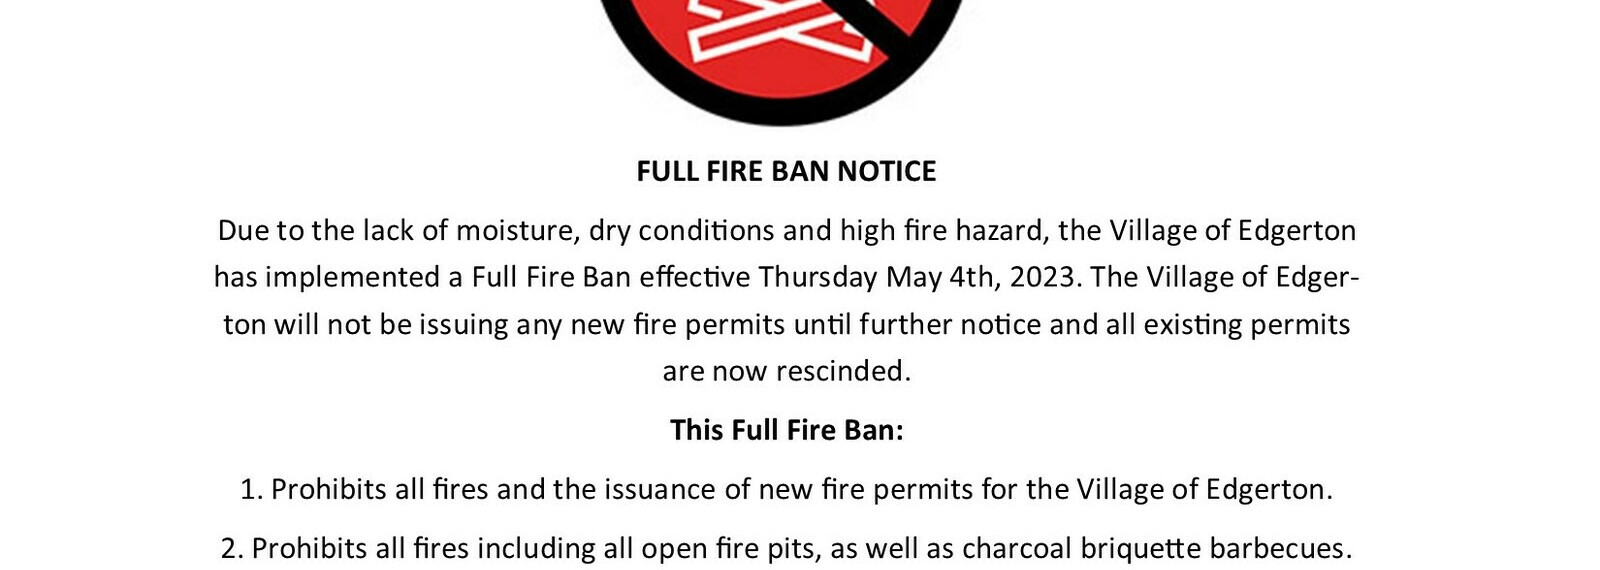 May 4, 2023 Full Fire Ban in Effect